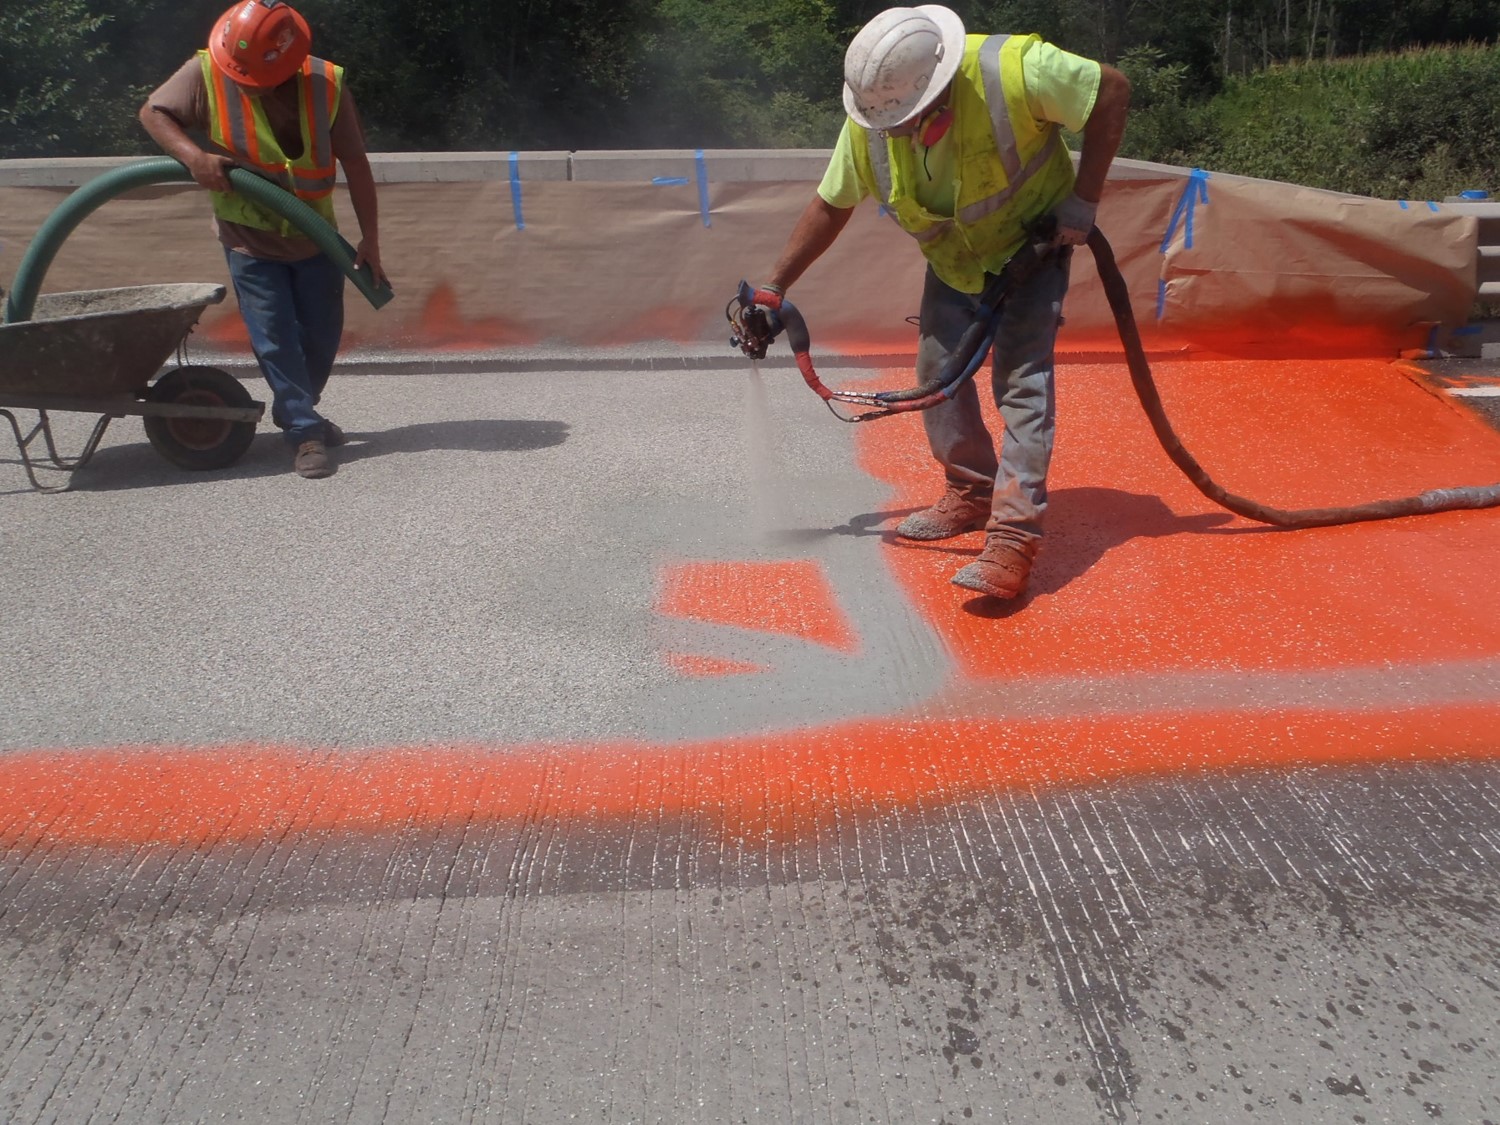 An image of two construction workers in hard hats and yellow safety vests using a sprayer to apply an orange waterproof coating to a bridge deck.